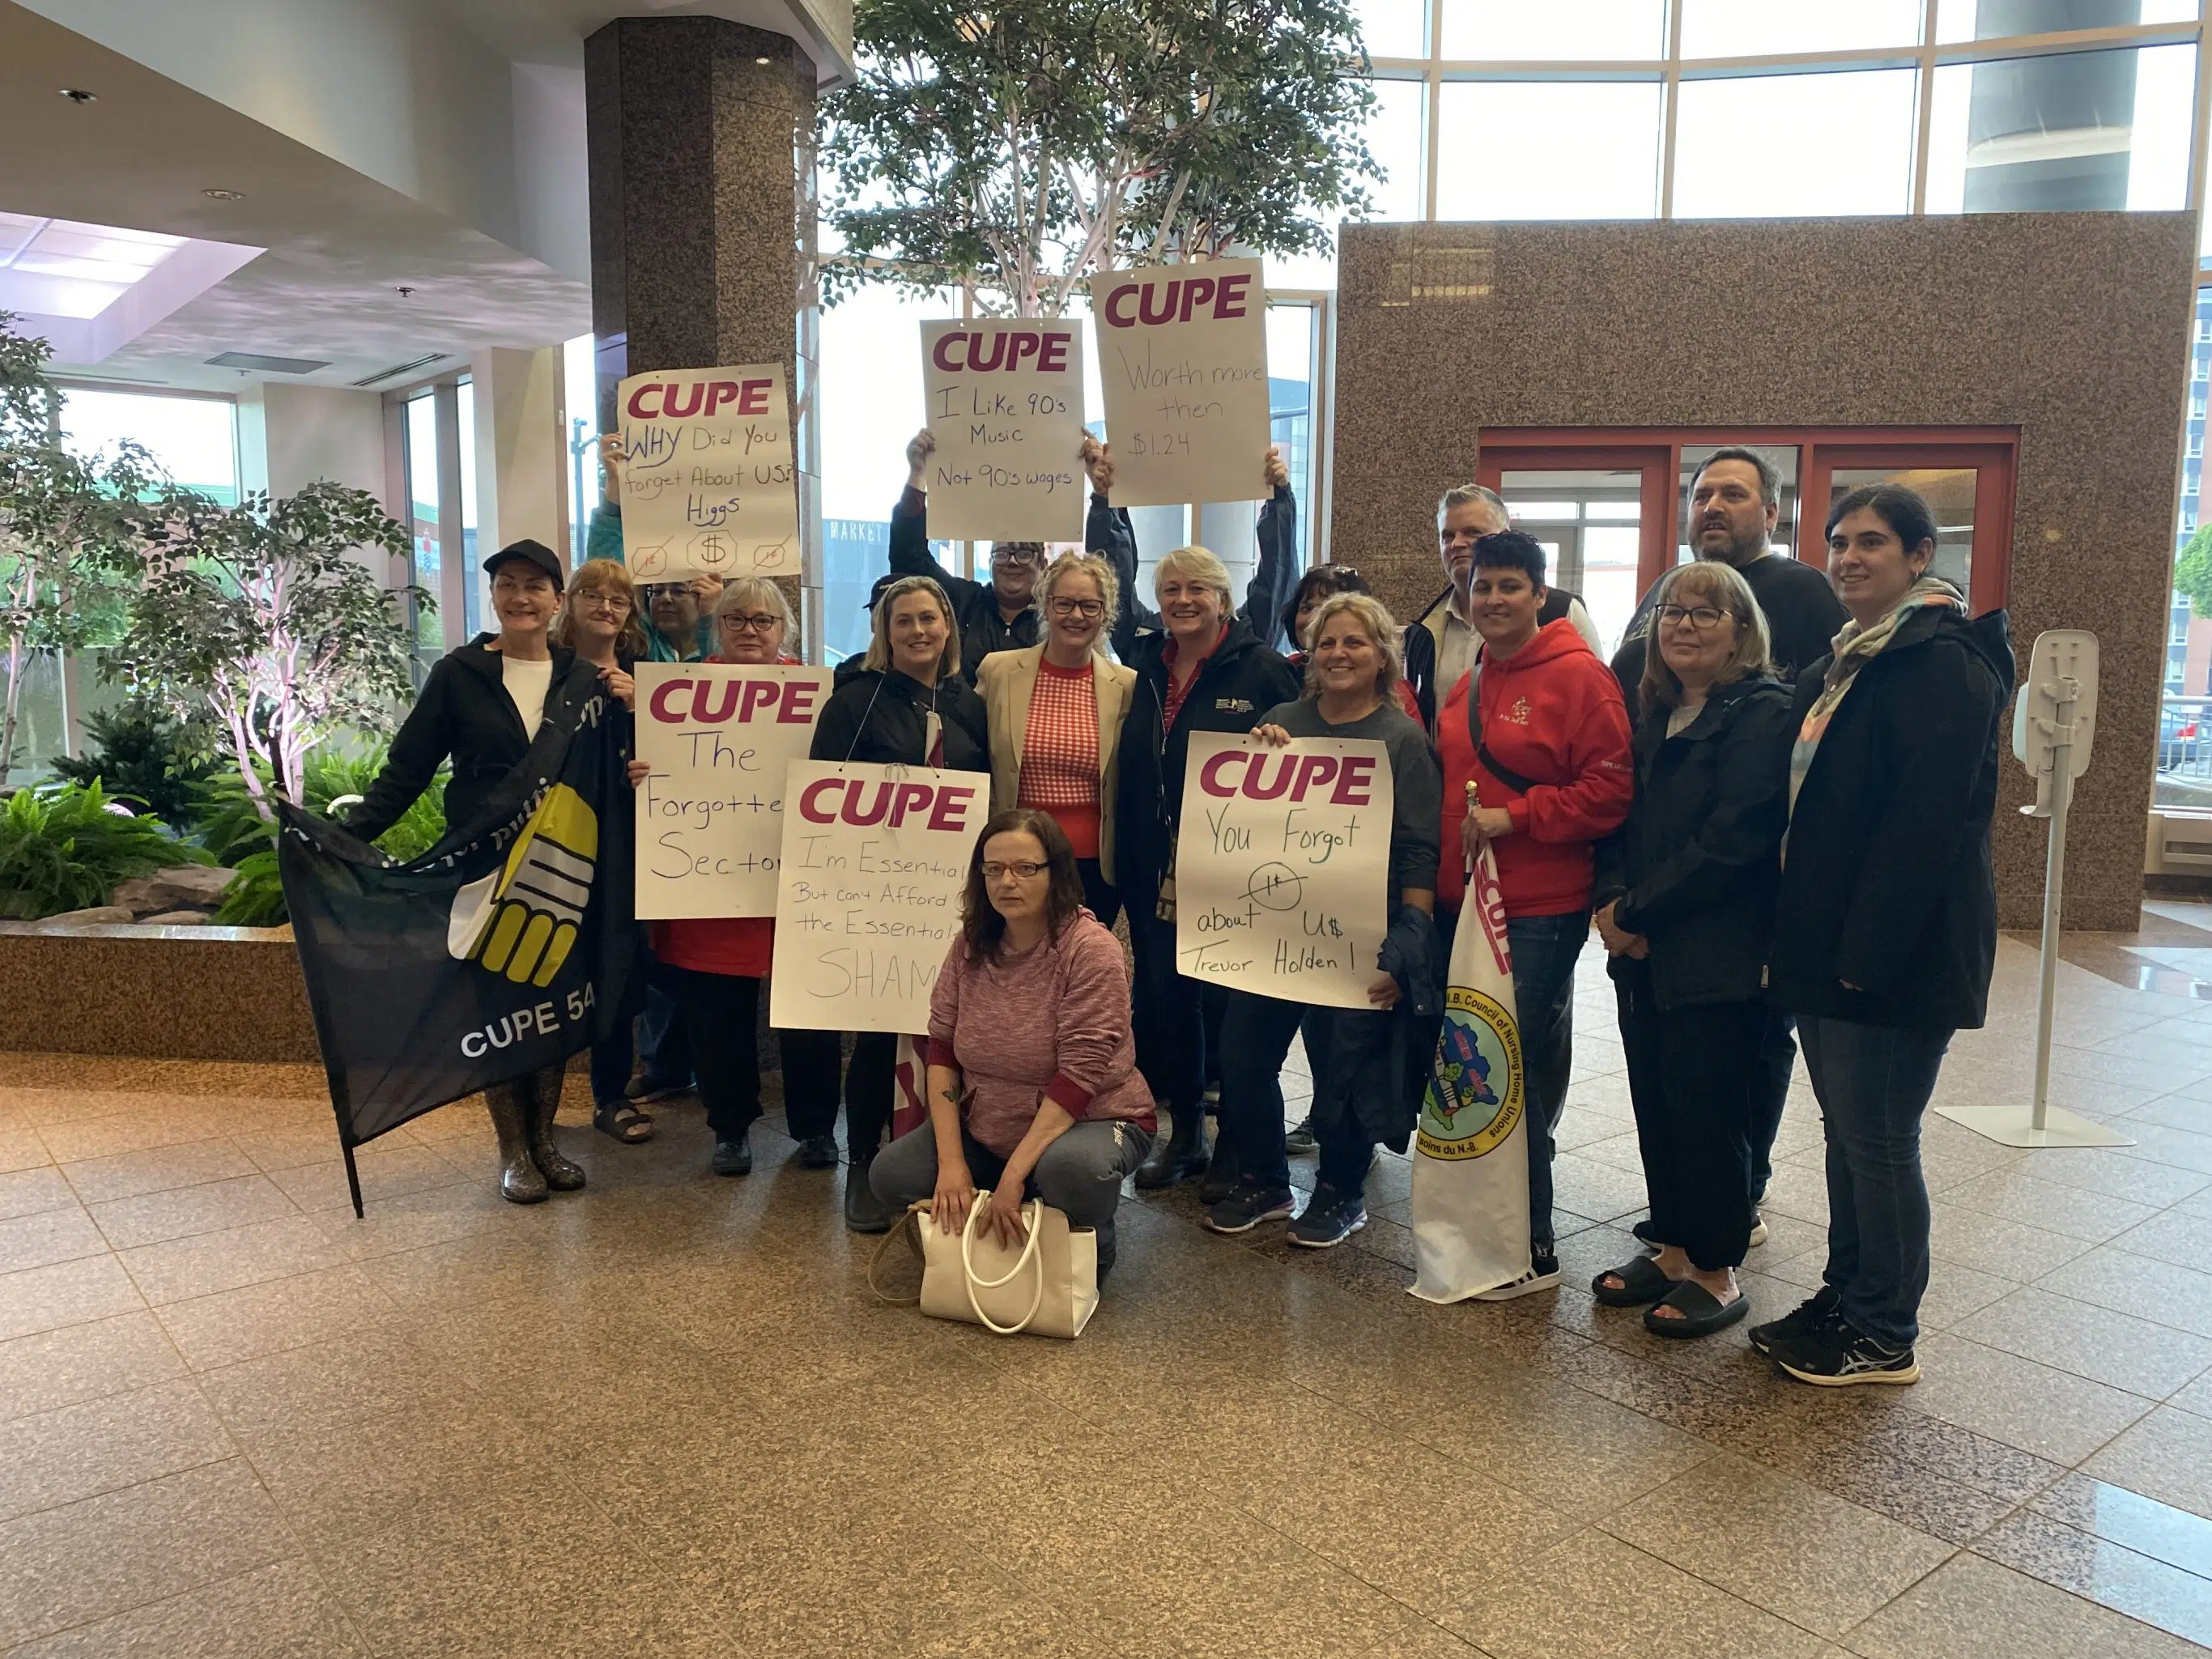 Contract negotiations for nursing home workers stall: union